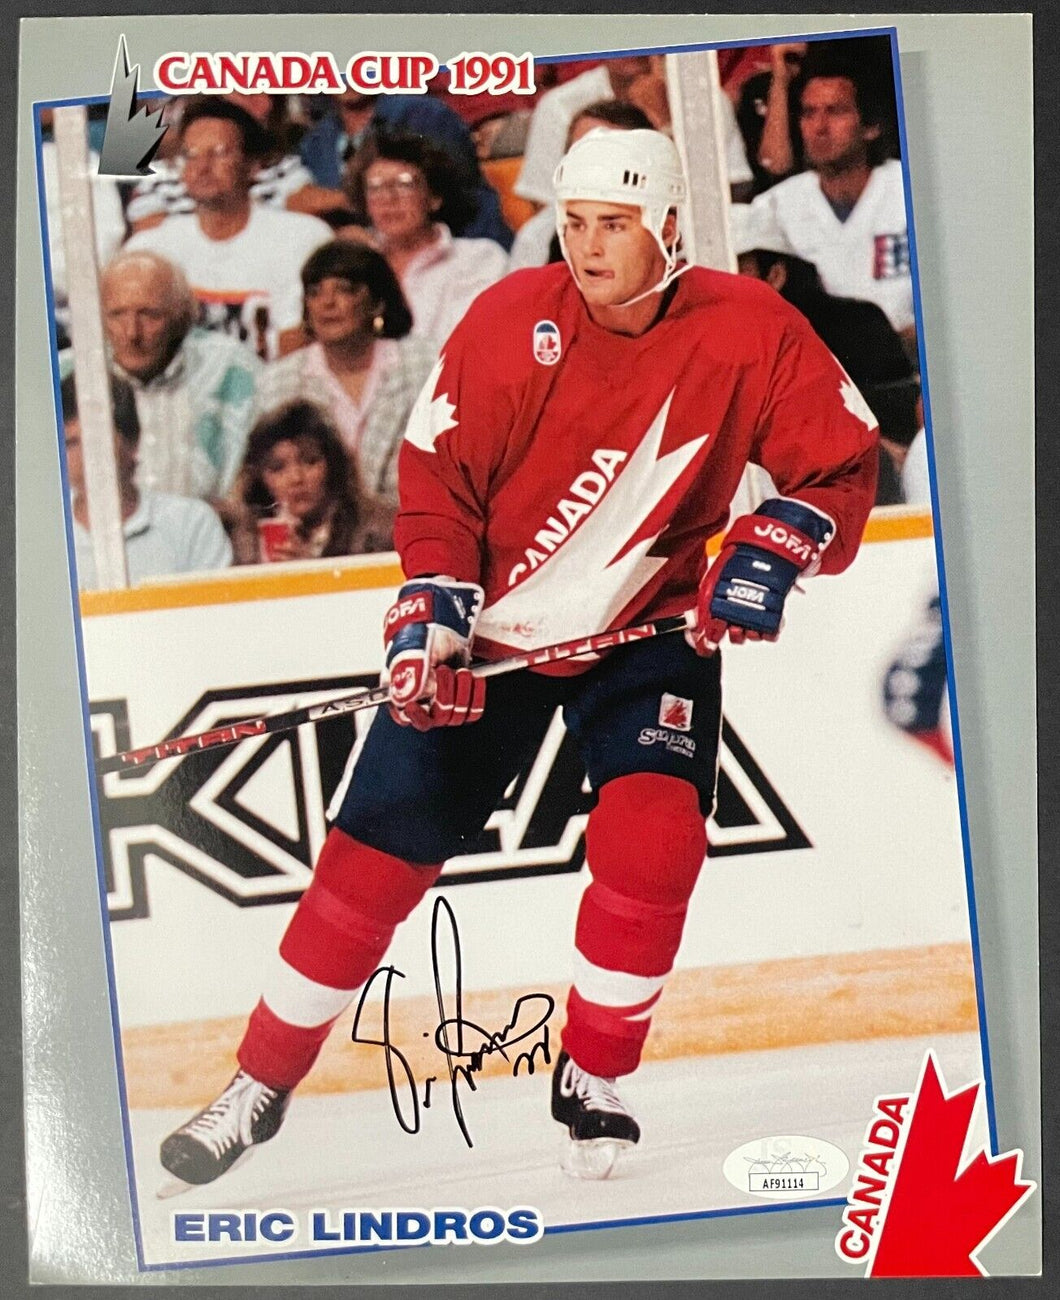 1991 Eric Lindros Signed Canada Cup Hockey Promo Photo Autographed Rookie JSA